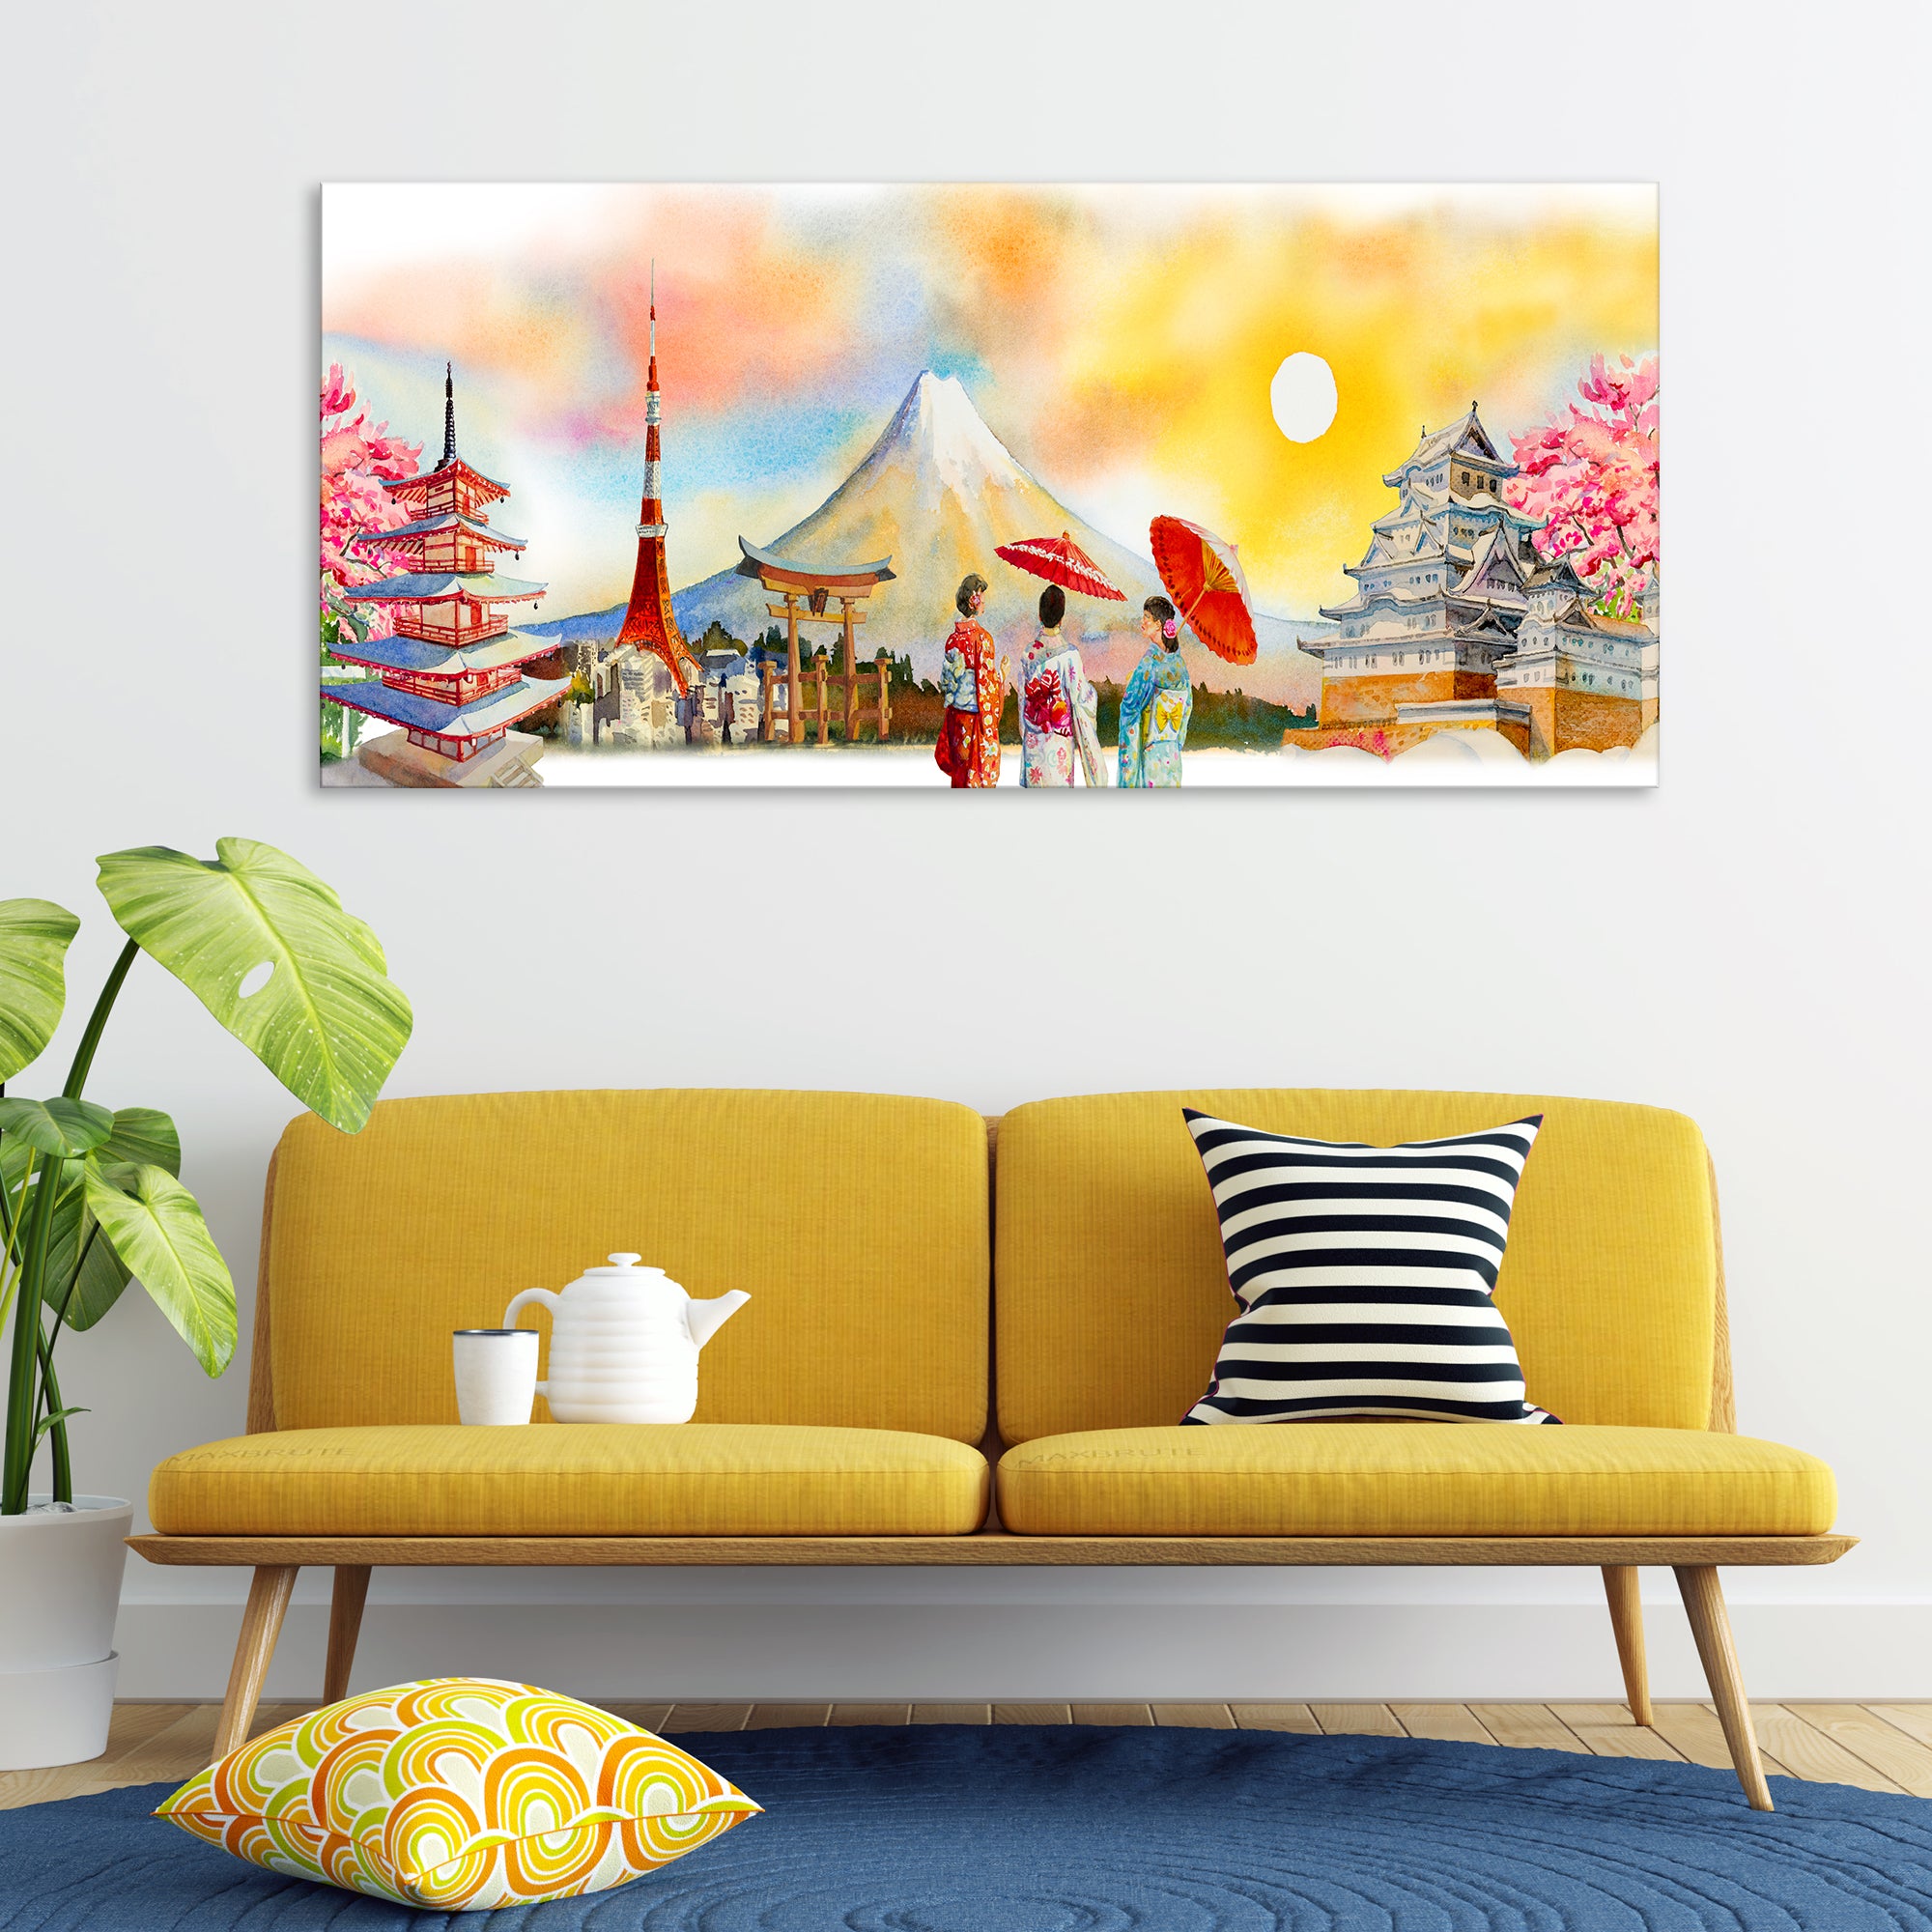 Japanese Culture and Architecture Canvas wall Painting